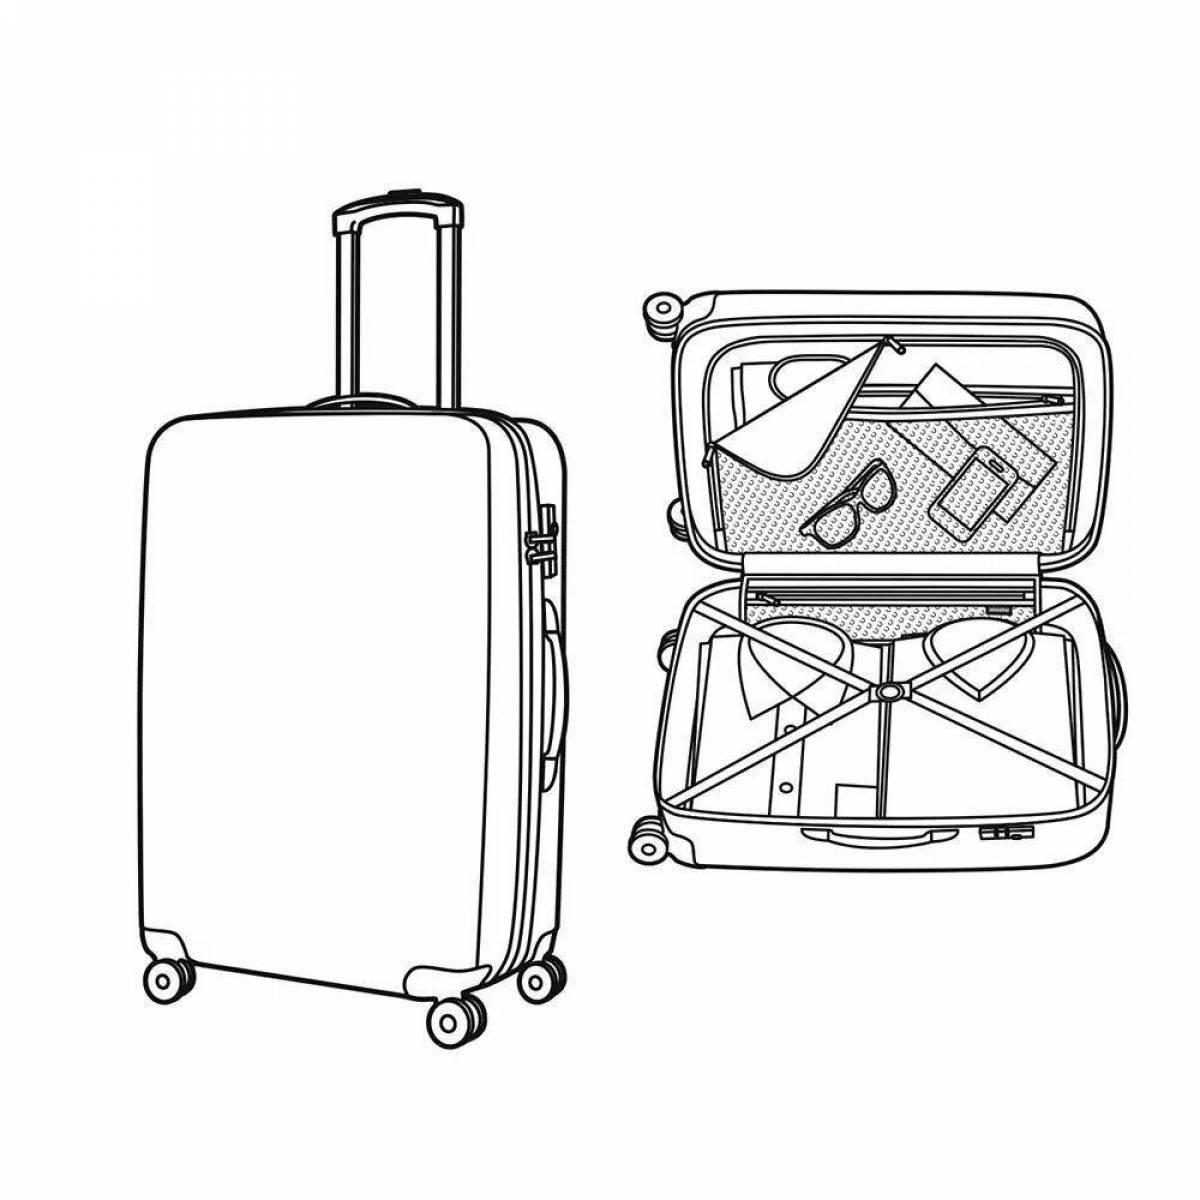 Fun suitcase coloring for kids